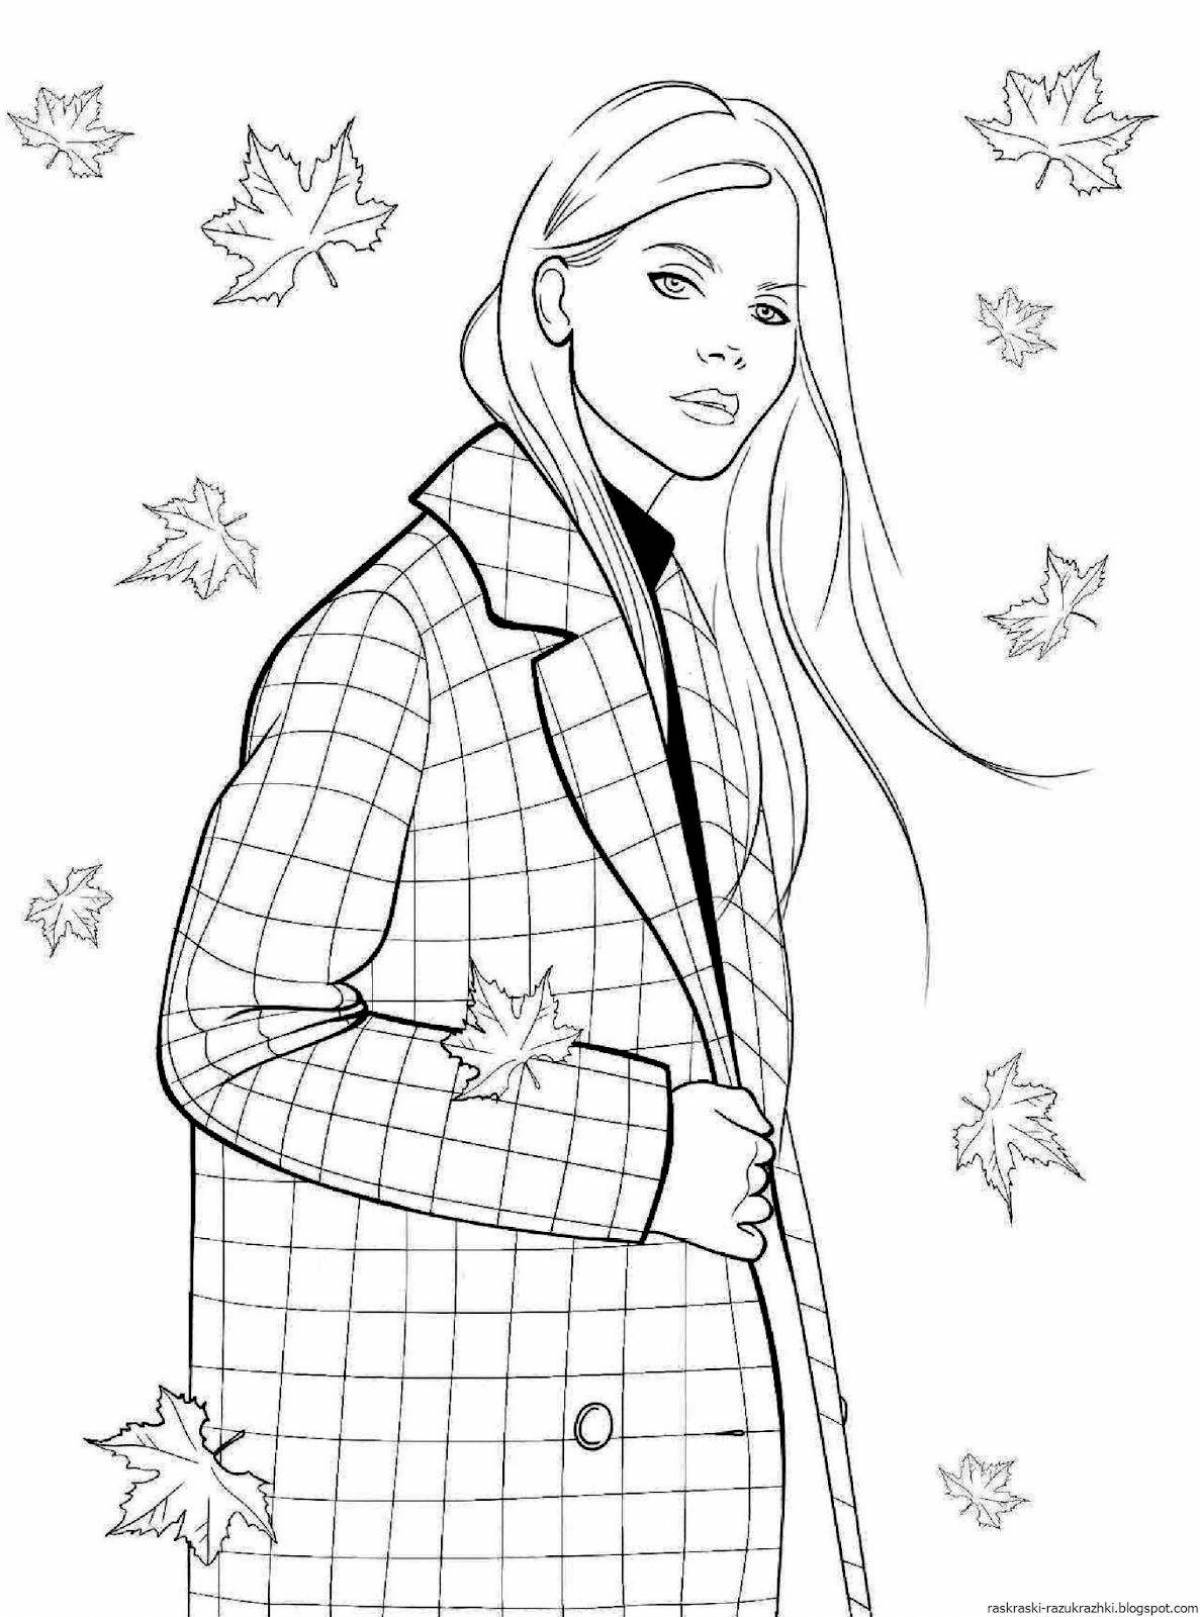 Cute people coloring pages for girls